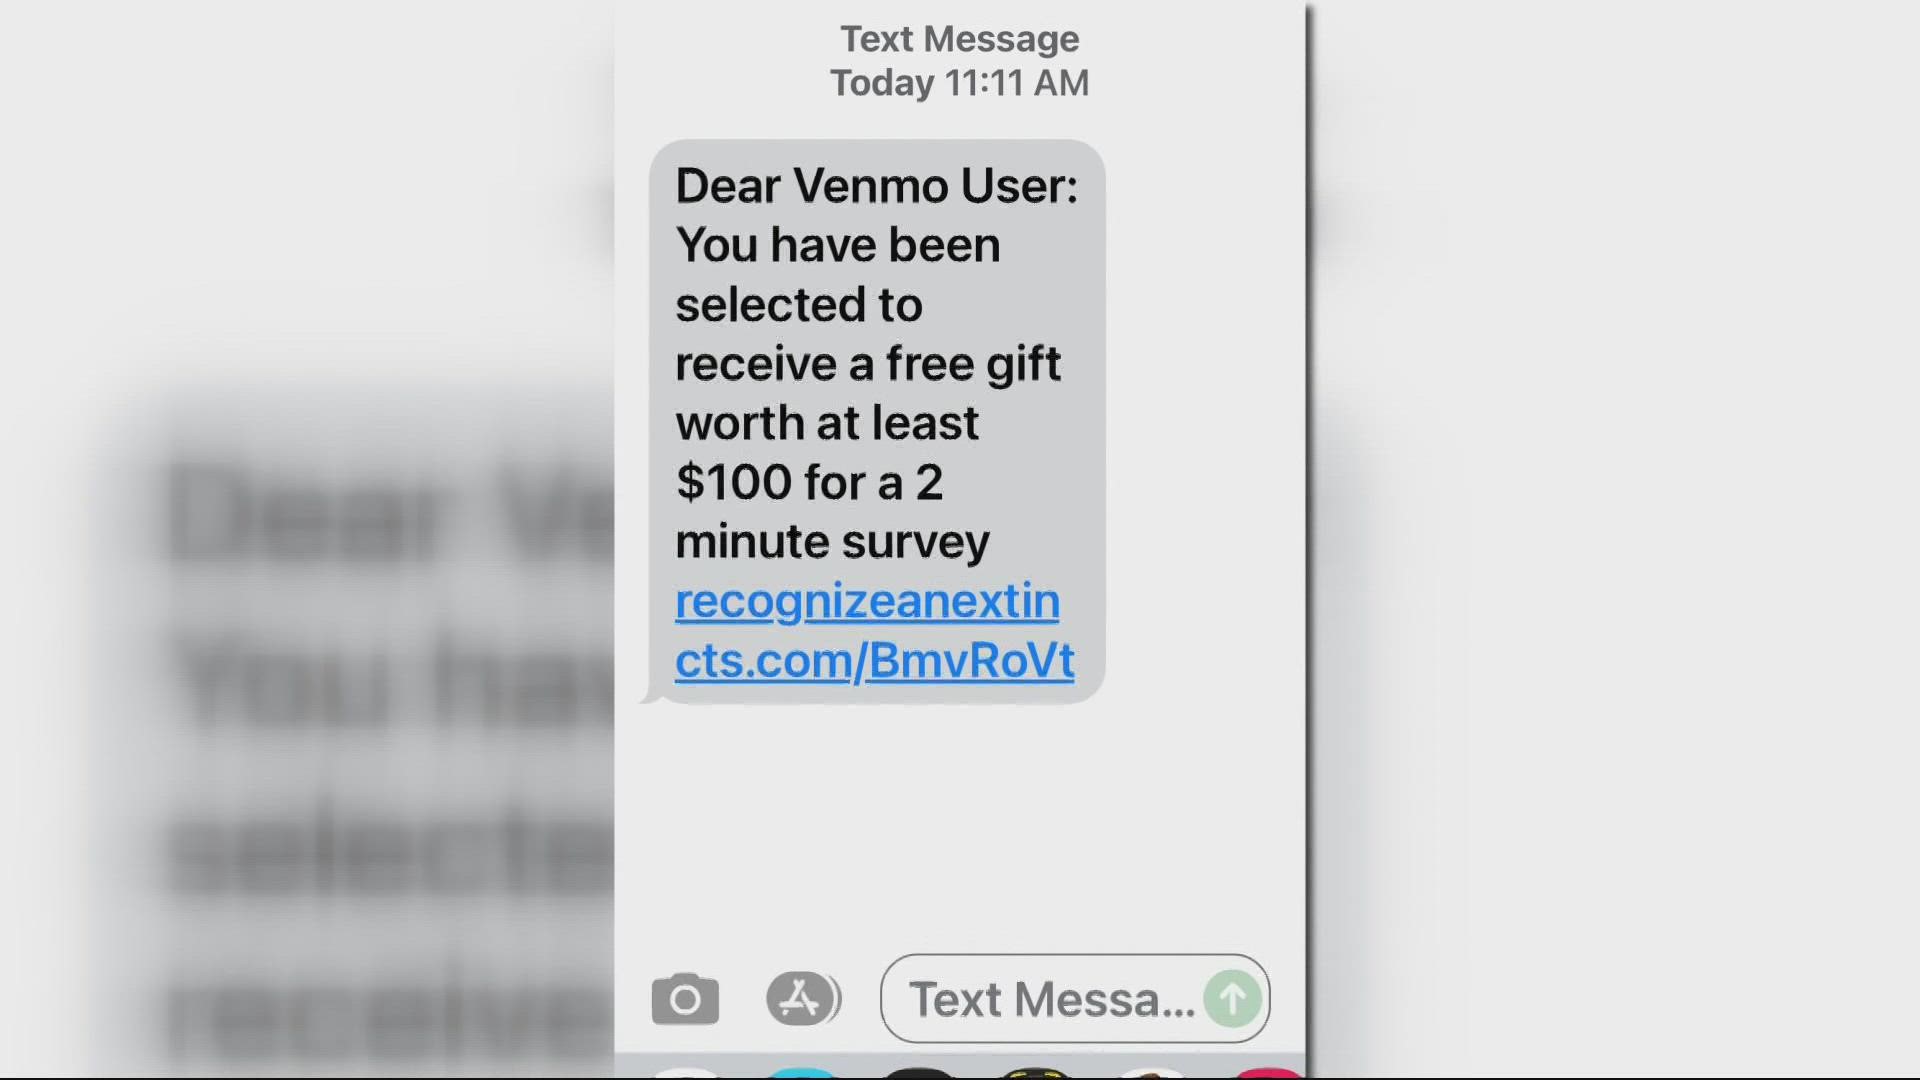 If you get a text message promising cash via Venmo or Zell for a survey, don't open it. It's a scam.